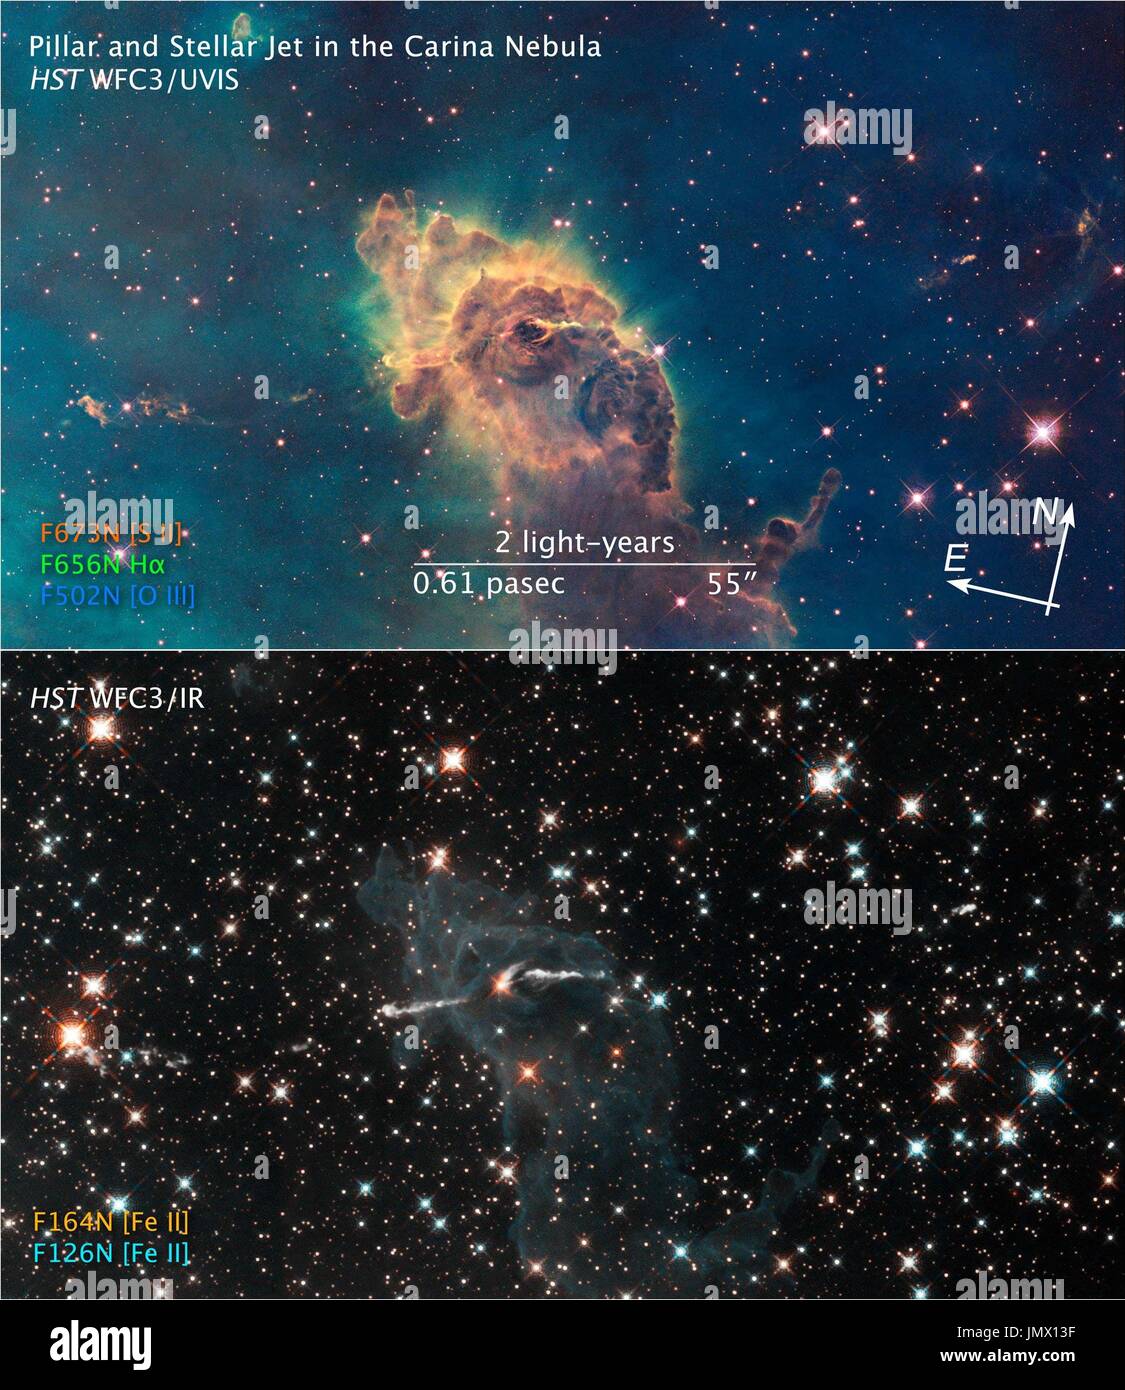 Washington, DC - September 9, 2009 -- These two images of a huge pillar of star birth demonstrate how observations taken in visible and in infrared light by the National Aeronautics and Space Administration's (NASA) Hubble Space Telescope reveal dramatically different and complementary views of an object.  The pictures demonstrate one example of the broad wavelength range of the new Wide Field Camera 3 (WFC3) aboard the Hubble telescope, extending from ultraviolet to visible to infrared light.  Composed of gas and dust, the pillar resides in a tempestuous stellar nursery called the Carina Nebu Stock Photo